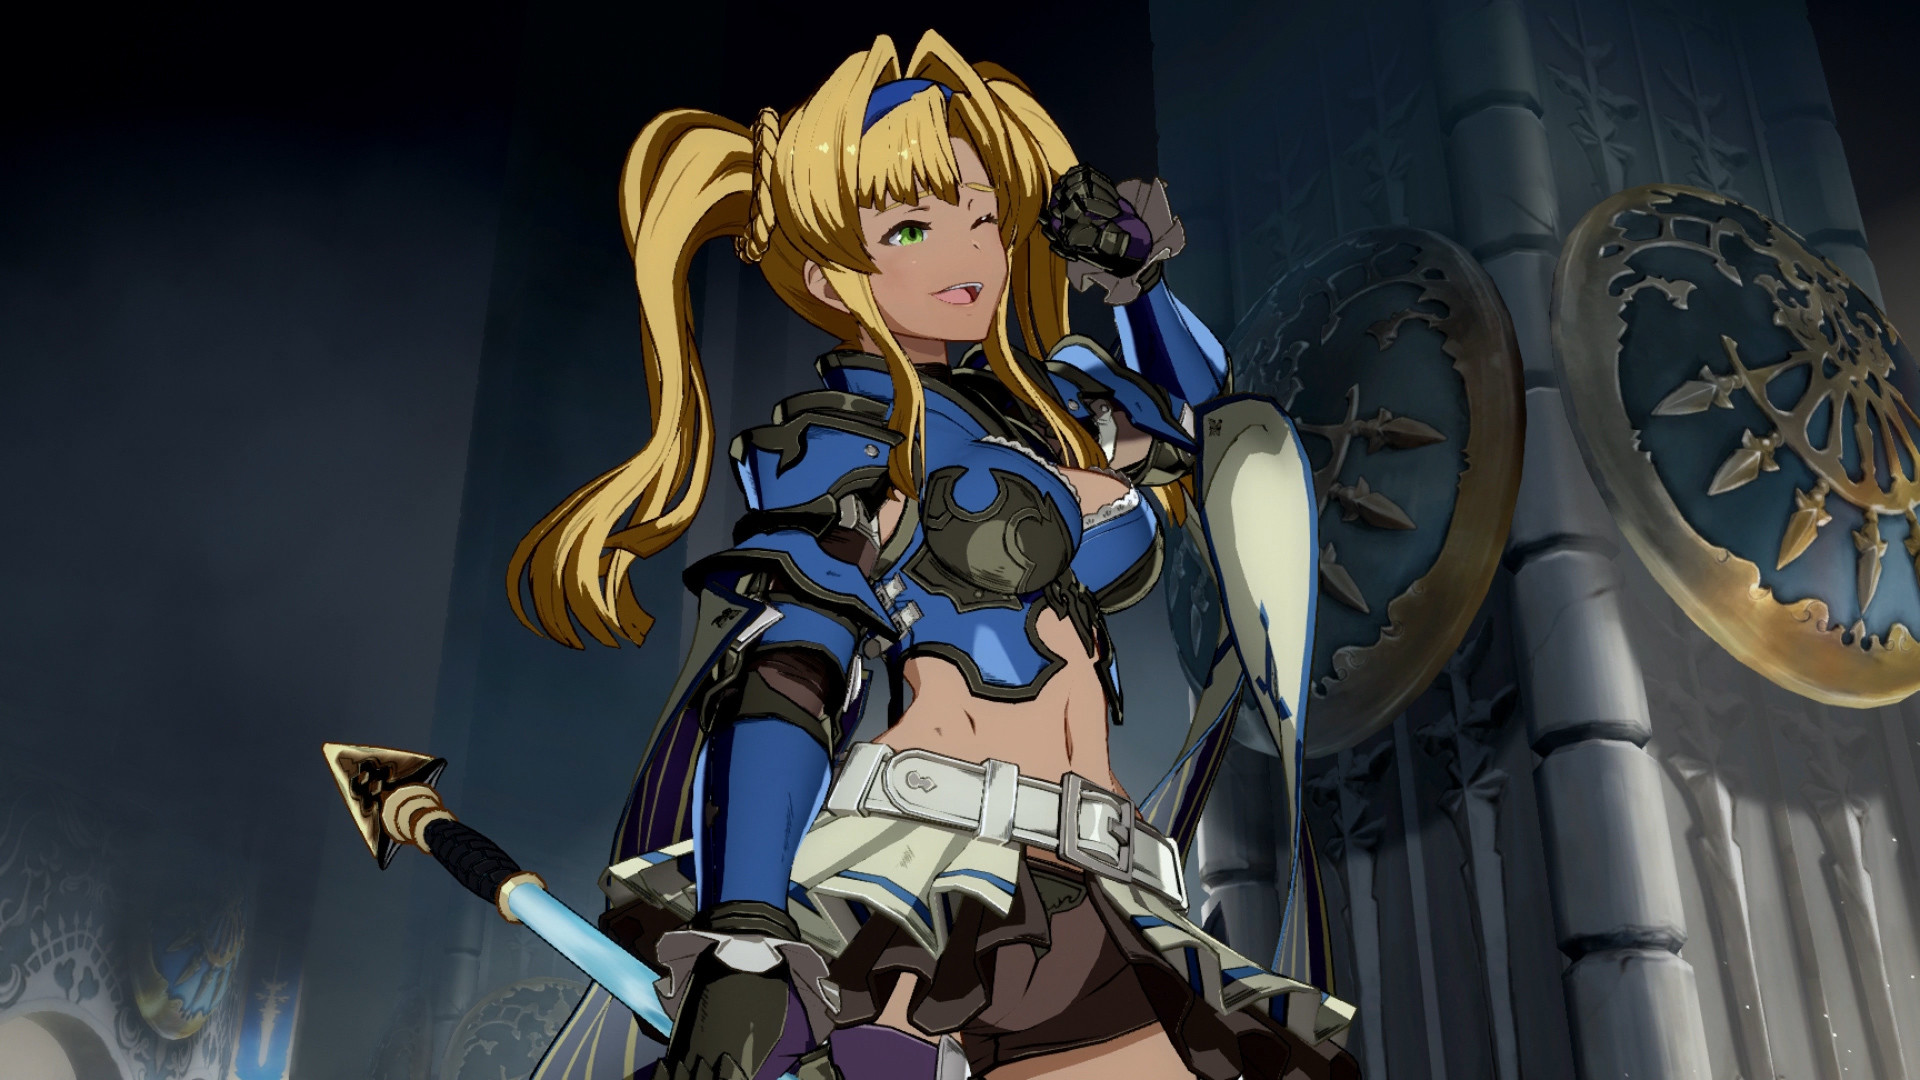 Granblue Fantasy Versus Coming to PC Via Steam on March 13th